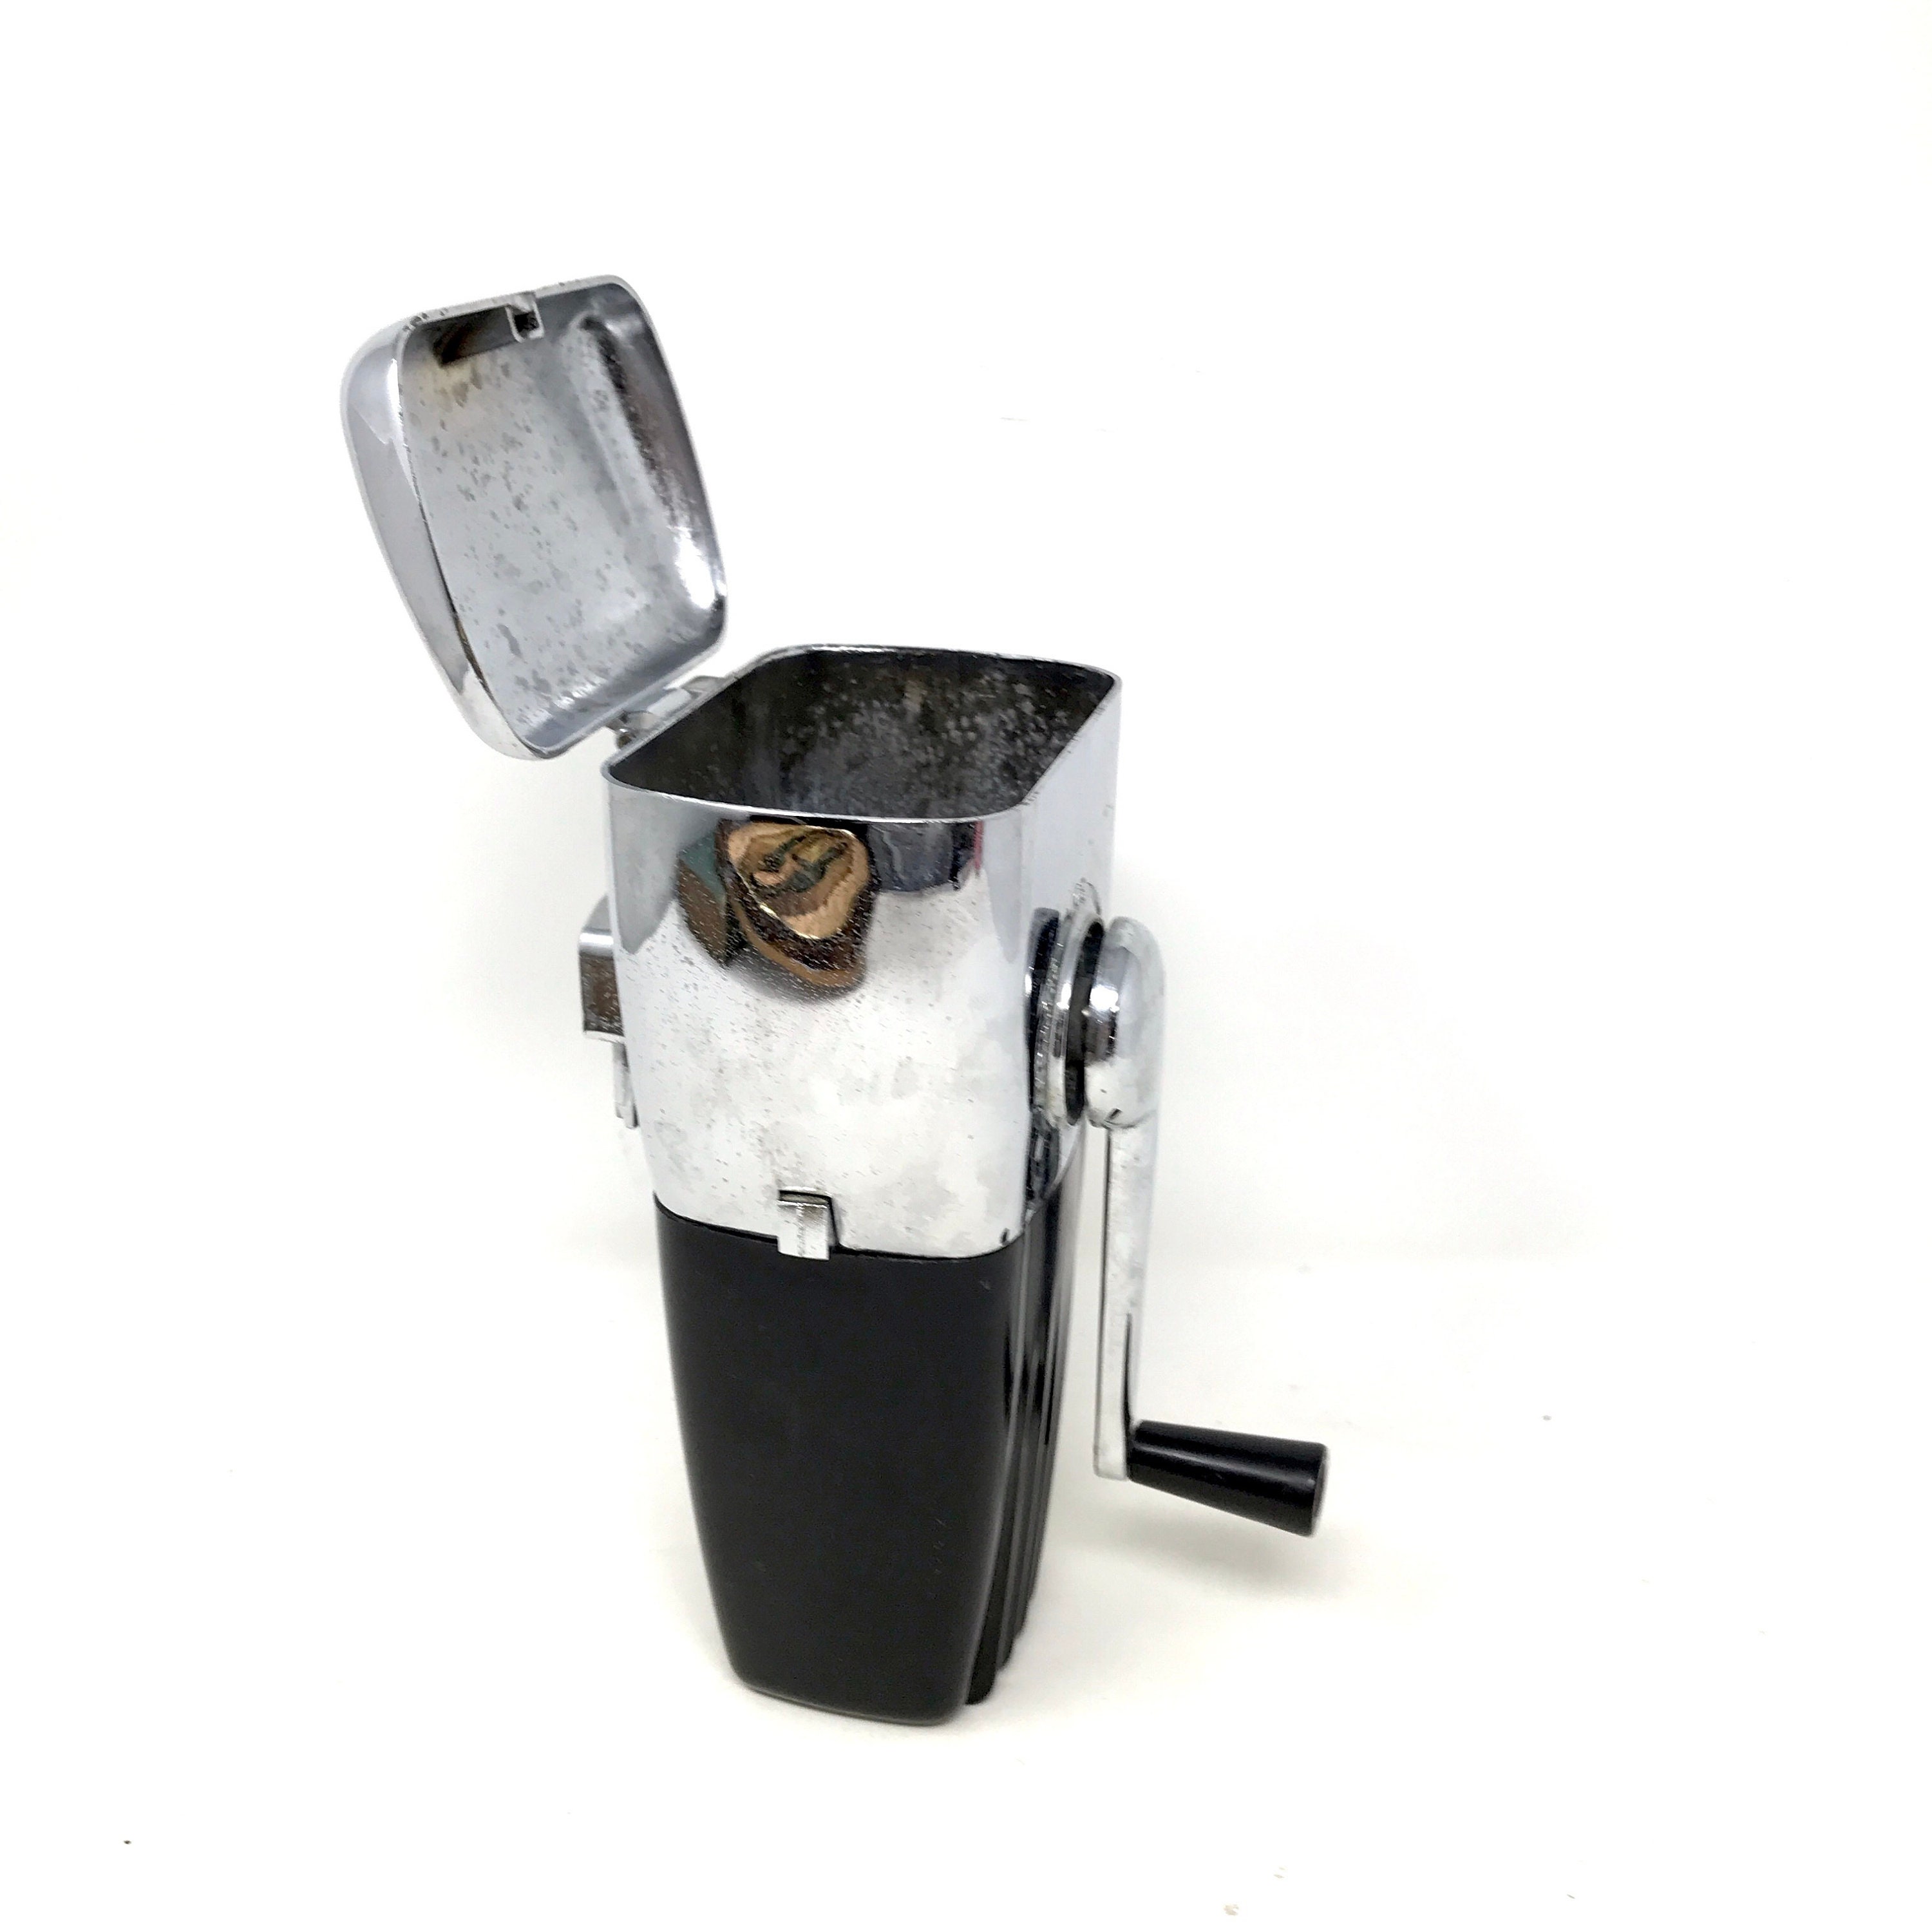 LANGM Hand Crank Ice Crusher Portable Hand Crank Ice Shaver Crusher with Stainless Steel Blades 